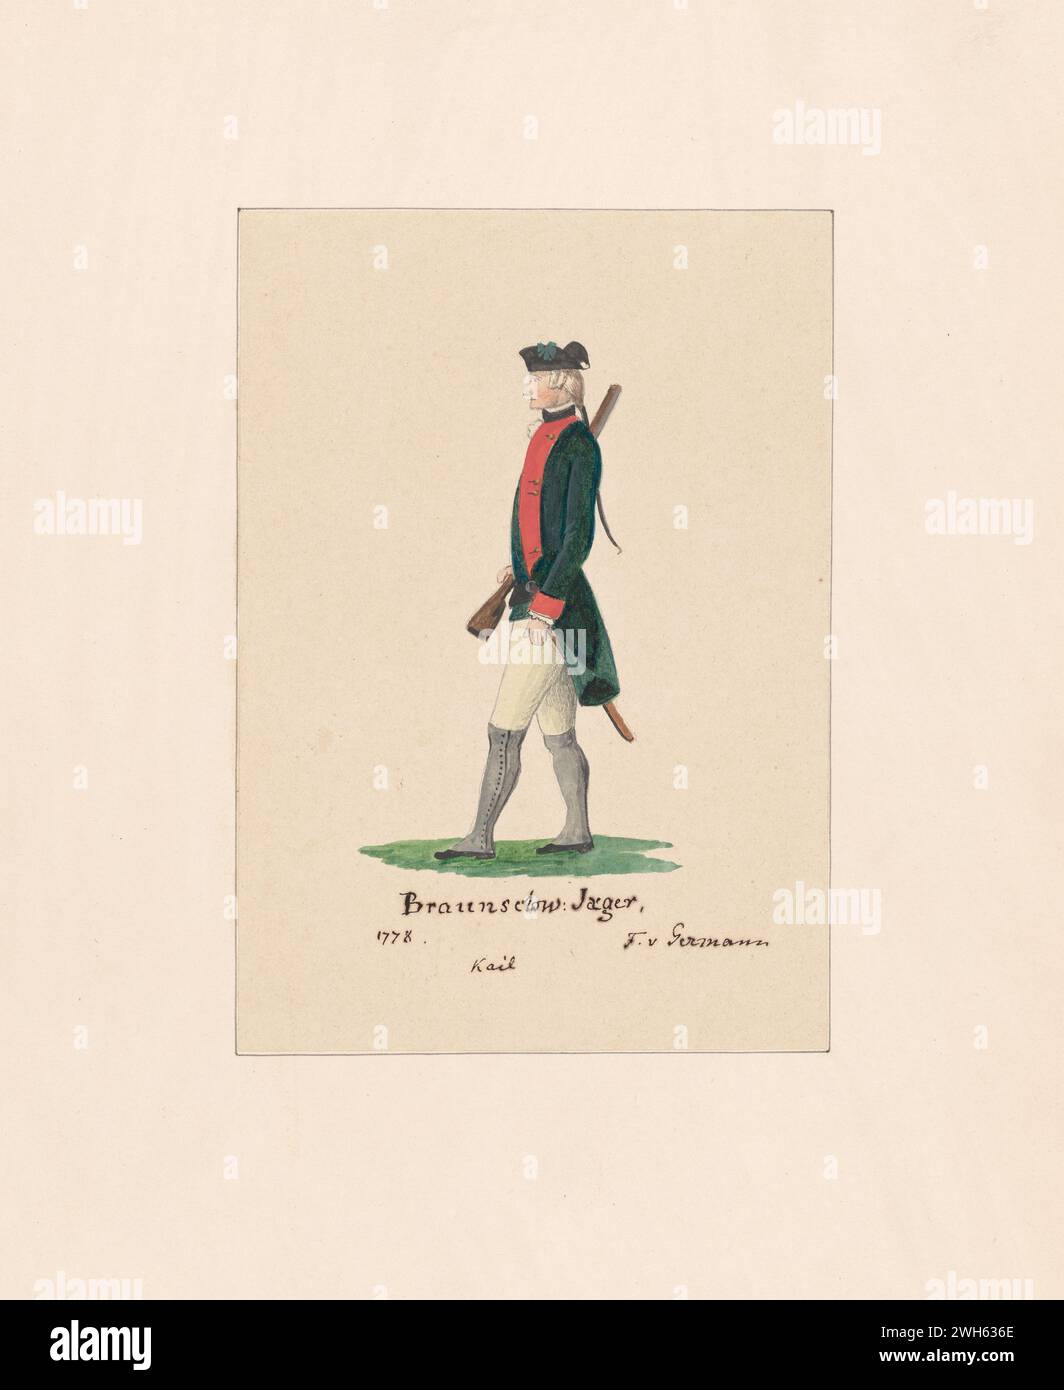 “Watercolor of a Soldier from the Battalion de chasseurs (Jaegers)  in the Brunswick (Braunschweig) Corps during the American Revolutionary War” circa 1778.  The battalion was light infantry.   From a series of prints by Friedrich von German captain of a regiment from Hesse-Hanau, one of the many German auxiliary troops hired by George III to fight in the American Revolution. He arrived in North America in 1775 During the war, he painted a series of watercolors of American, British, and German soldiers. Stock Photo